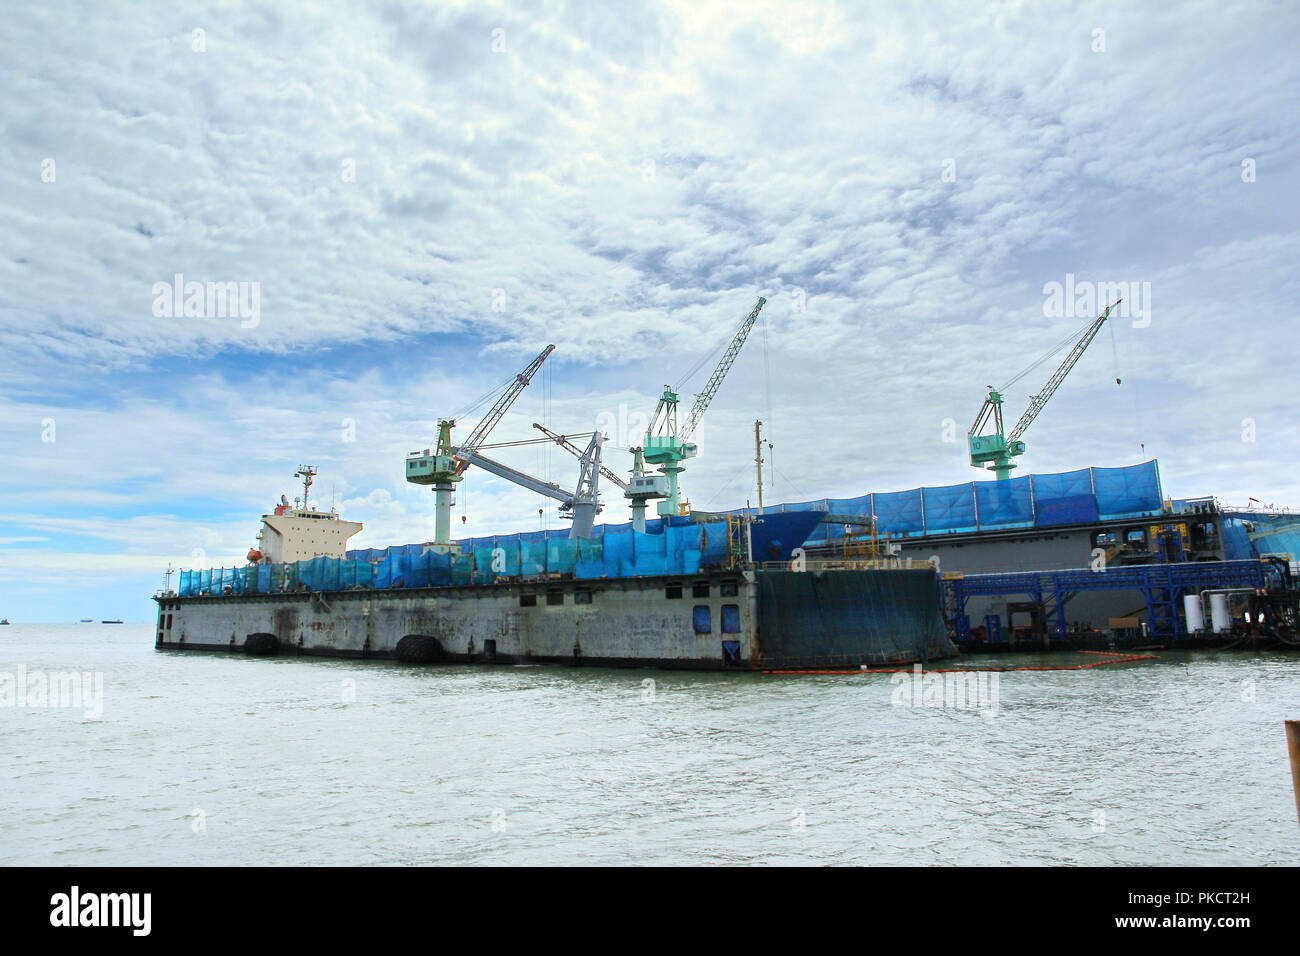 Large commercial ships into floating repair dock. The shipyard crane provide blue mesh  fabric  and drop the buoy oil reservoir. To prevent contaminat Stock Photo